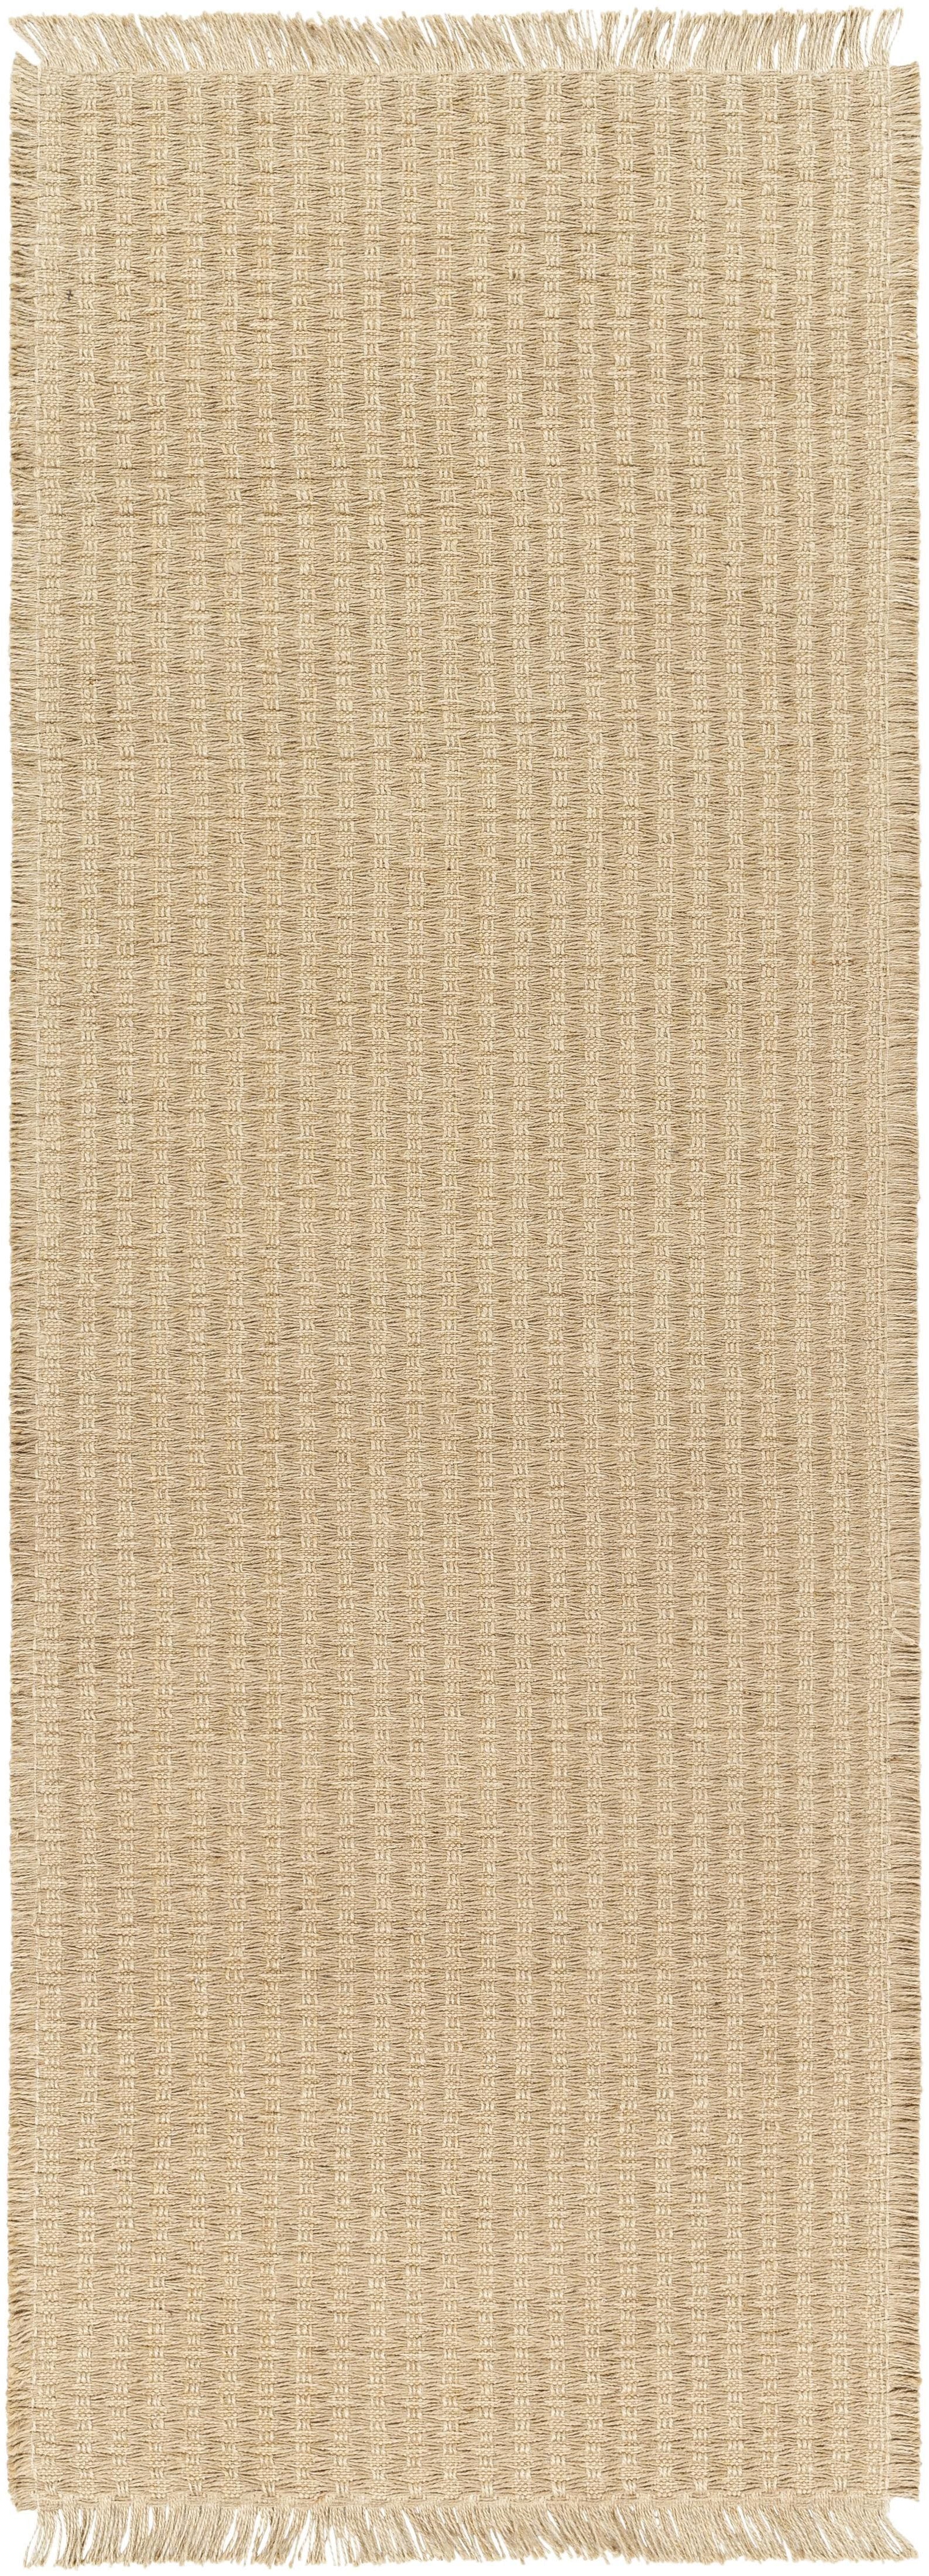 Introducing the stunning Kimi area rug – a special collaboration piece between Surya and Becki Owens. This beautiful rug is the perfect addition to any room to bring a touch of timeless elegance and style. Crafted from high-quality jute, this rug features a unique texture that adds visual interest and dimension to your space. Amethyst Home provides interior design, new home construction design consulting, vintage area rugs, and lighting in the Omaha metro area.